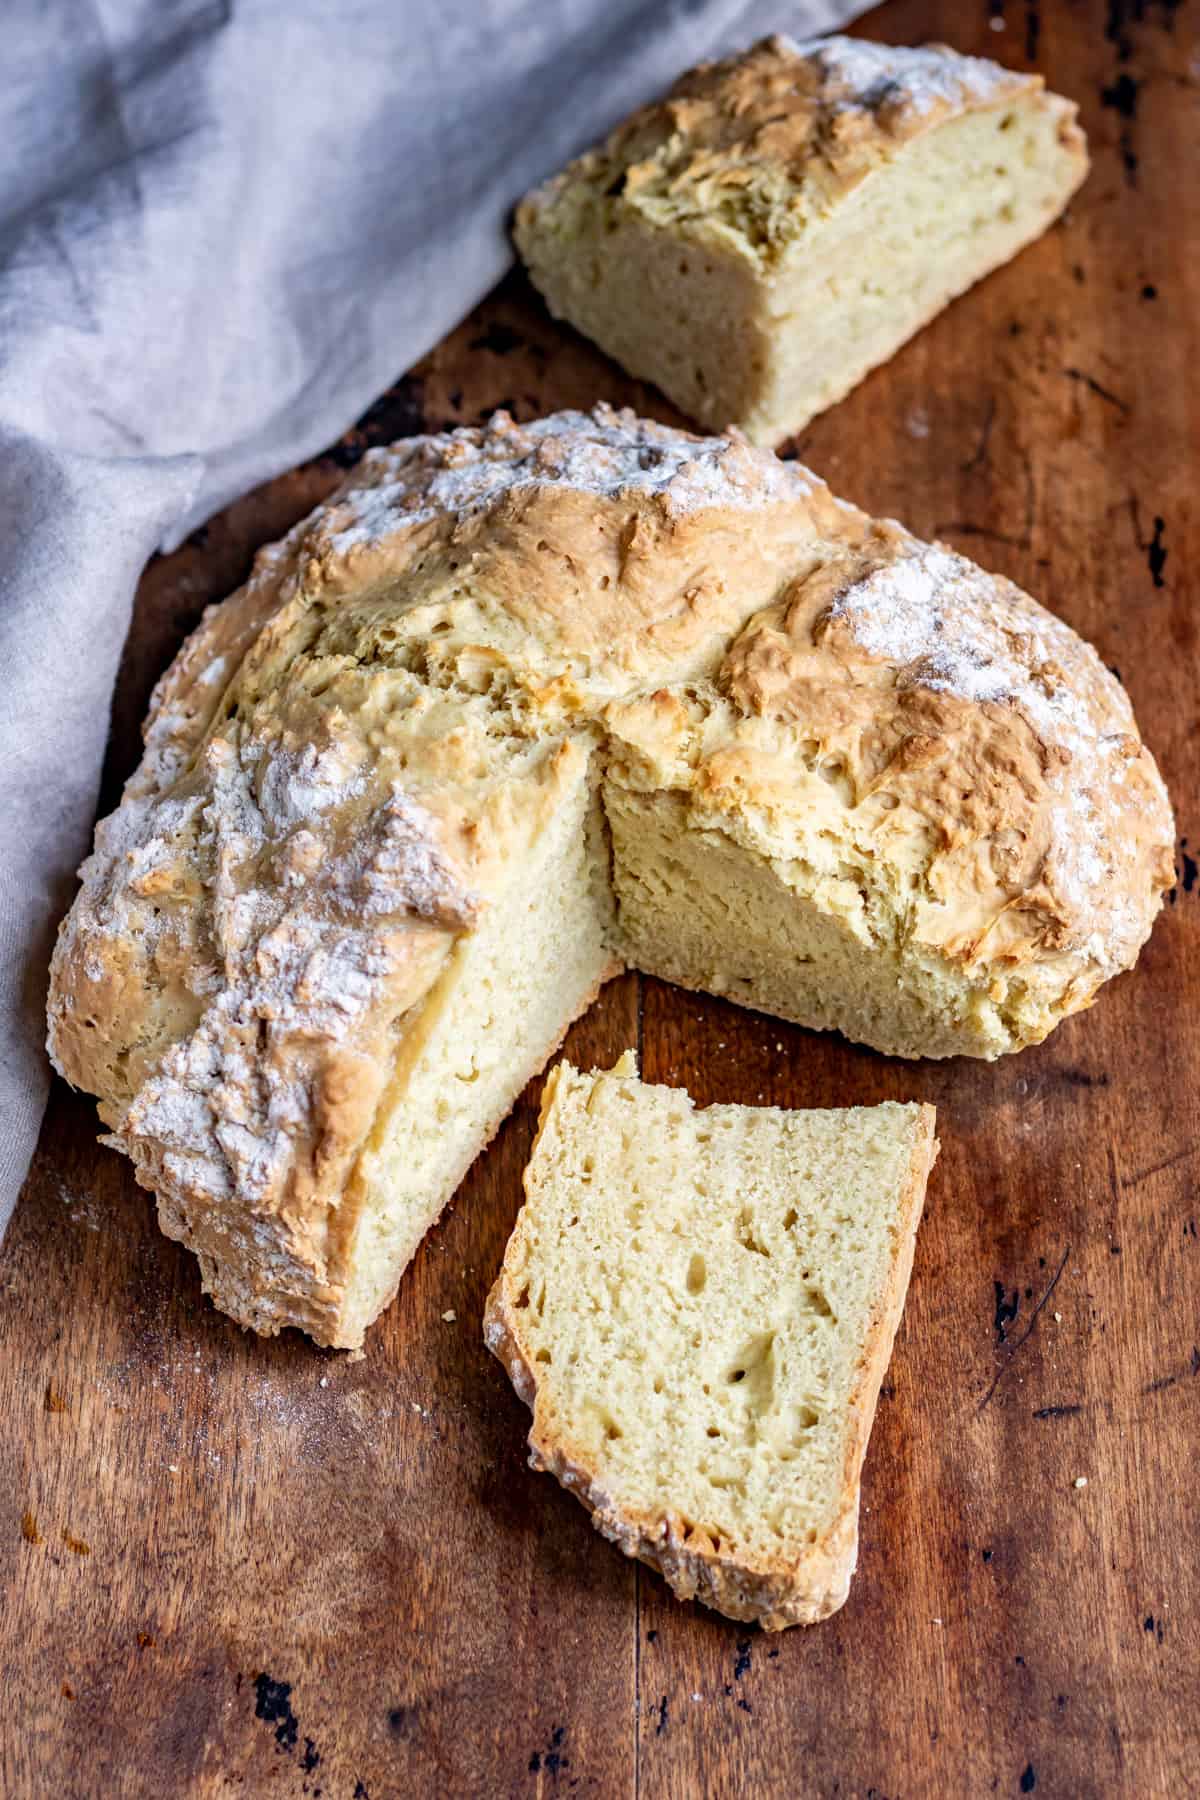 Loaf of soda bread with a piece cut out.